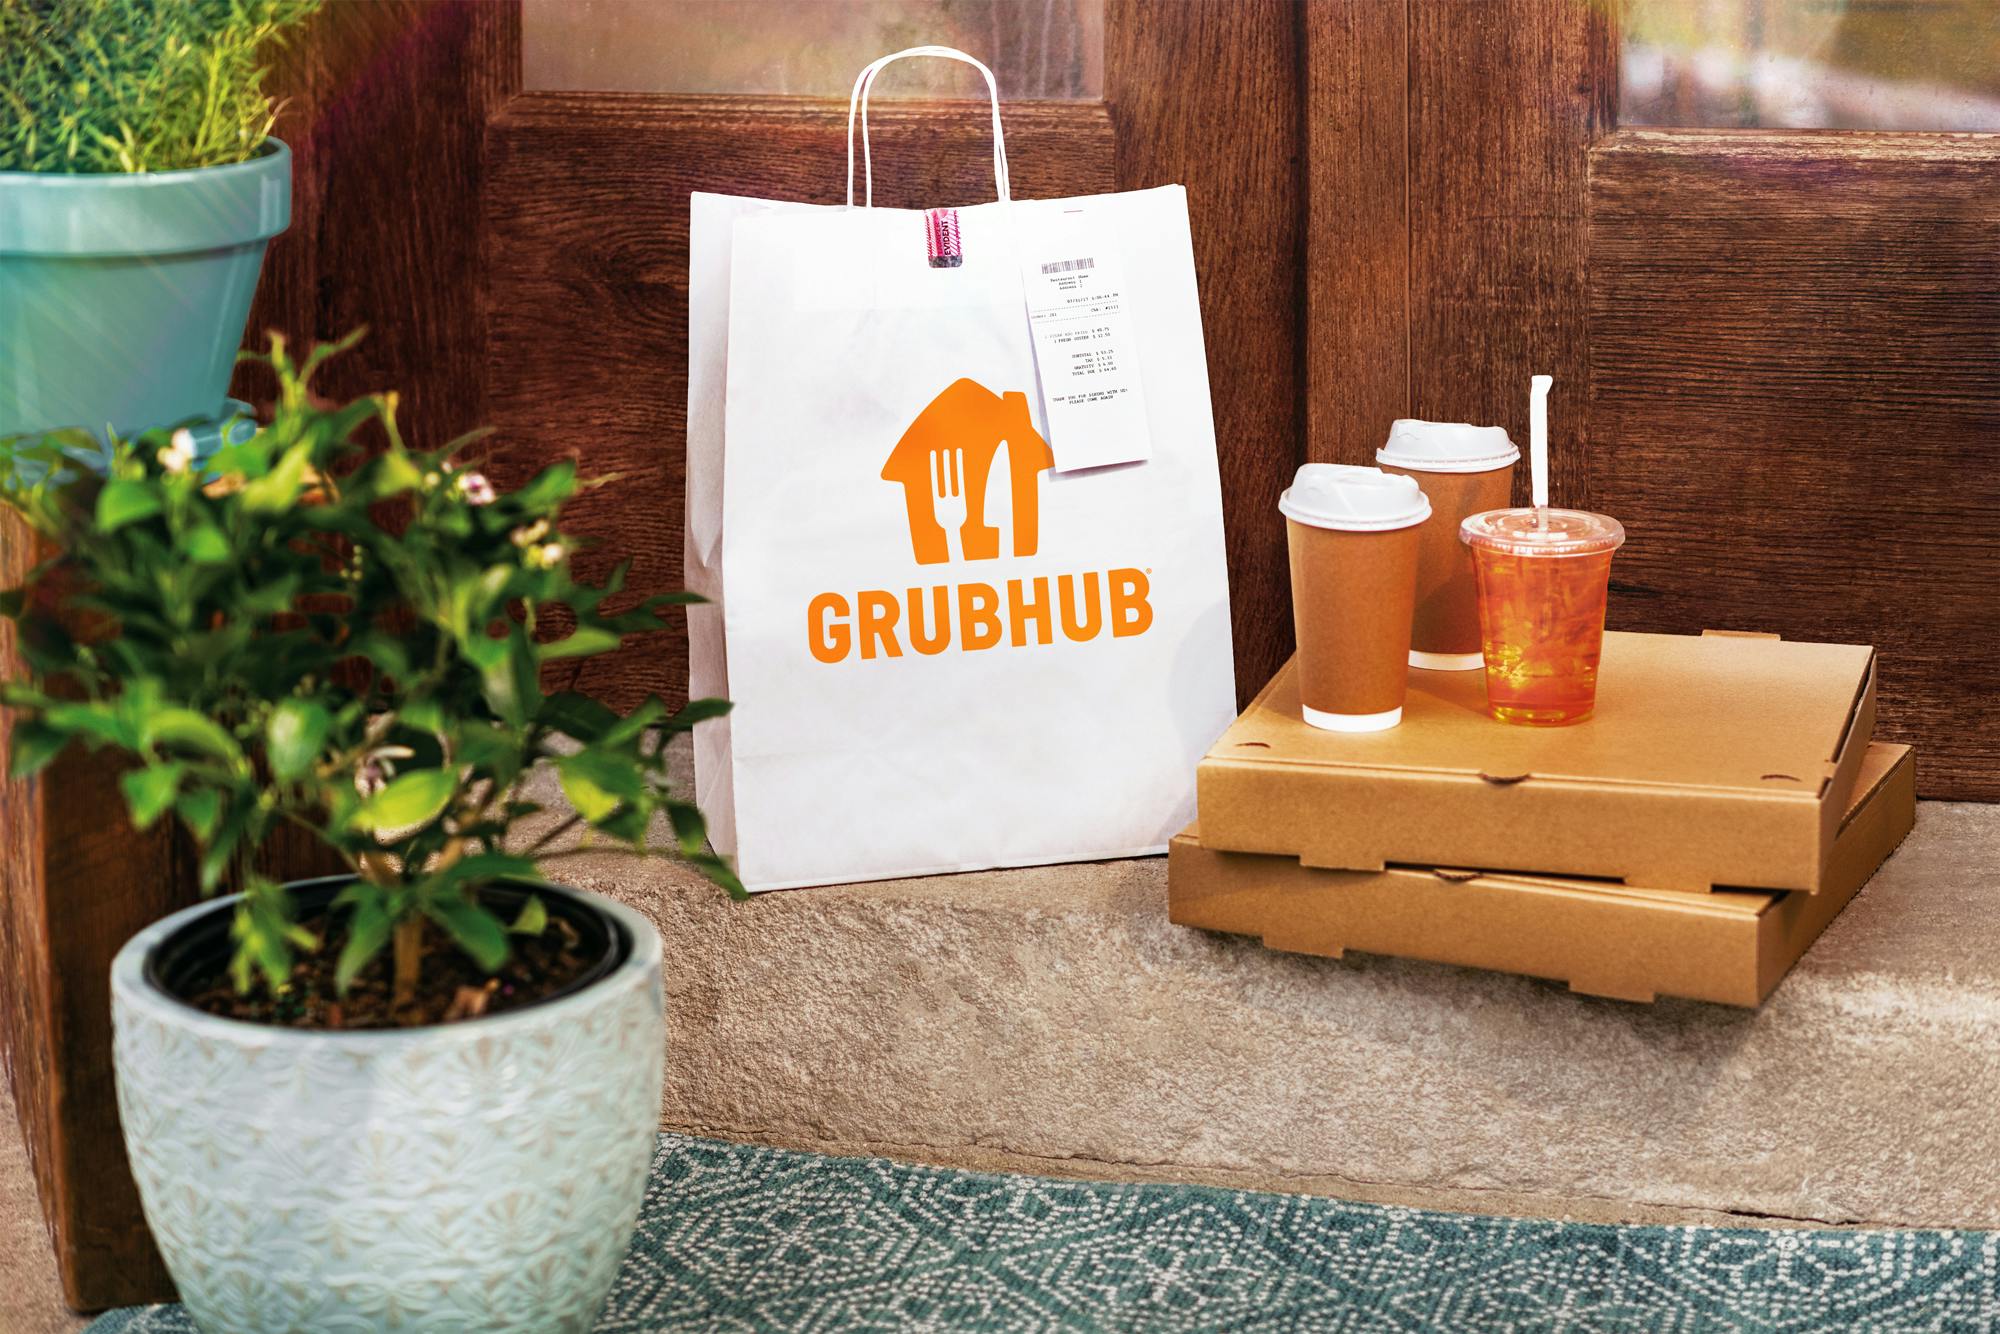 grubhub delivery order by front door